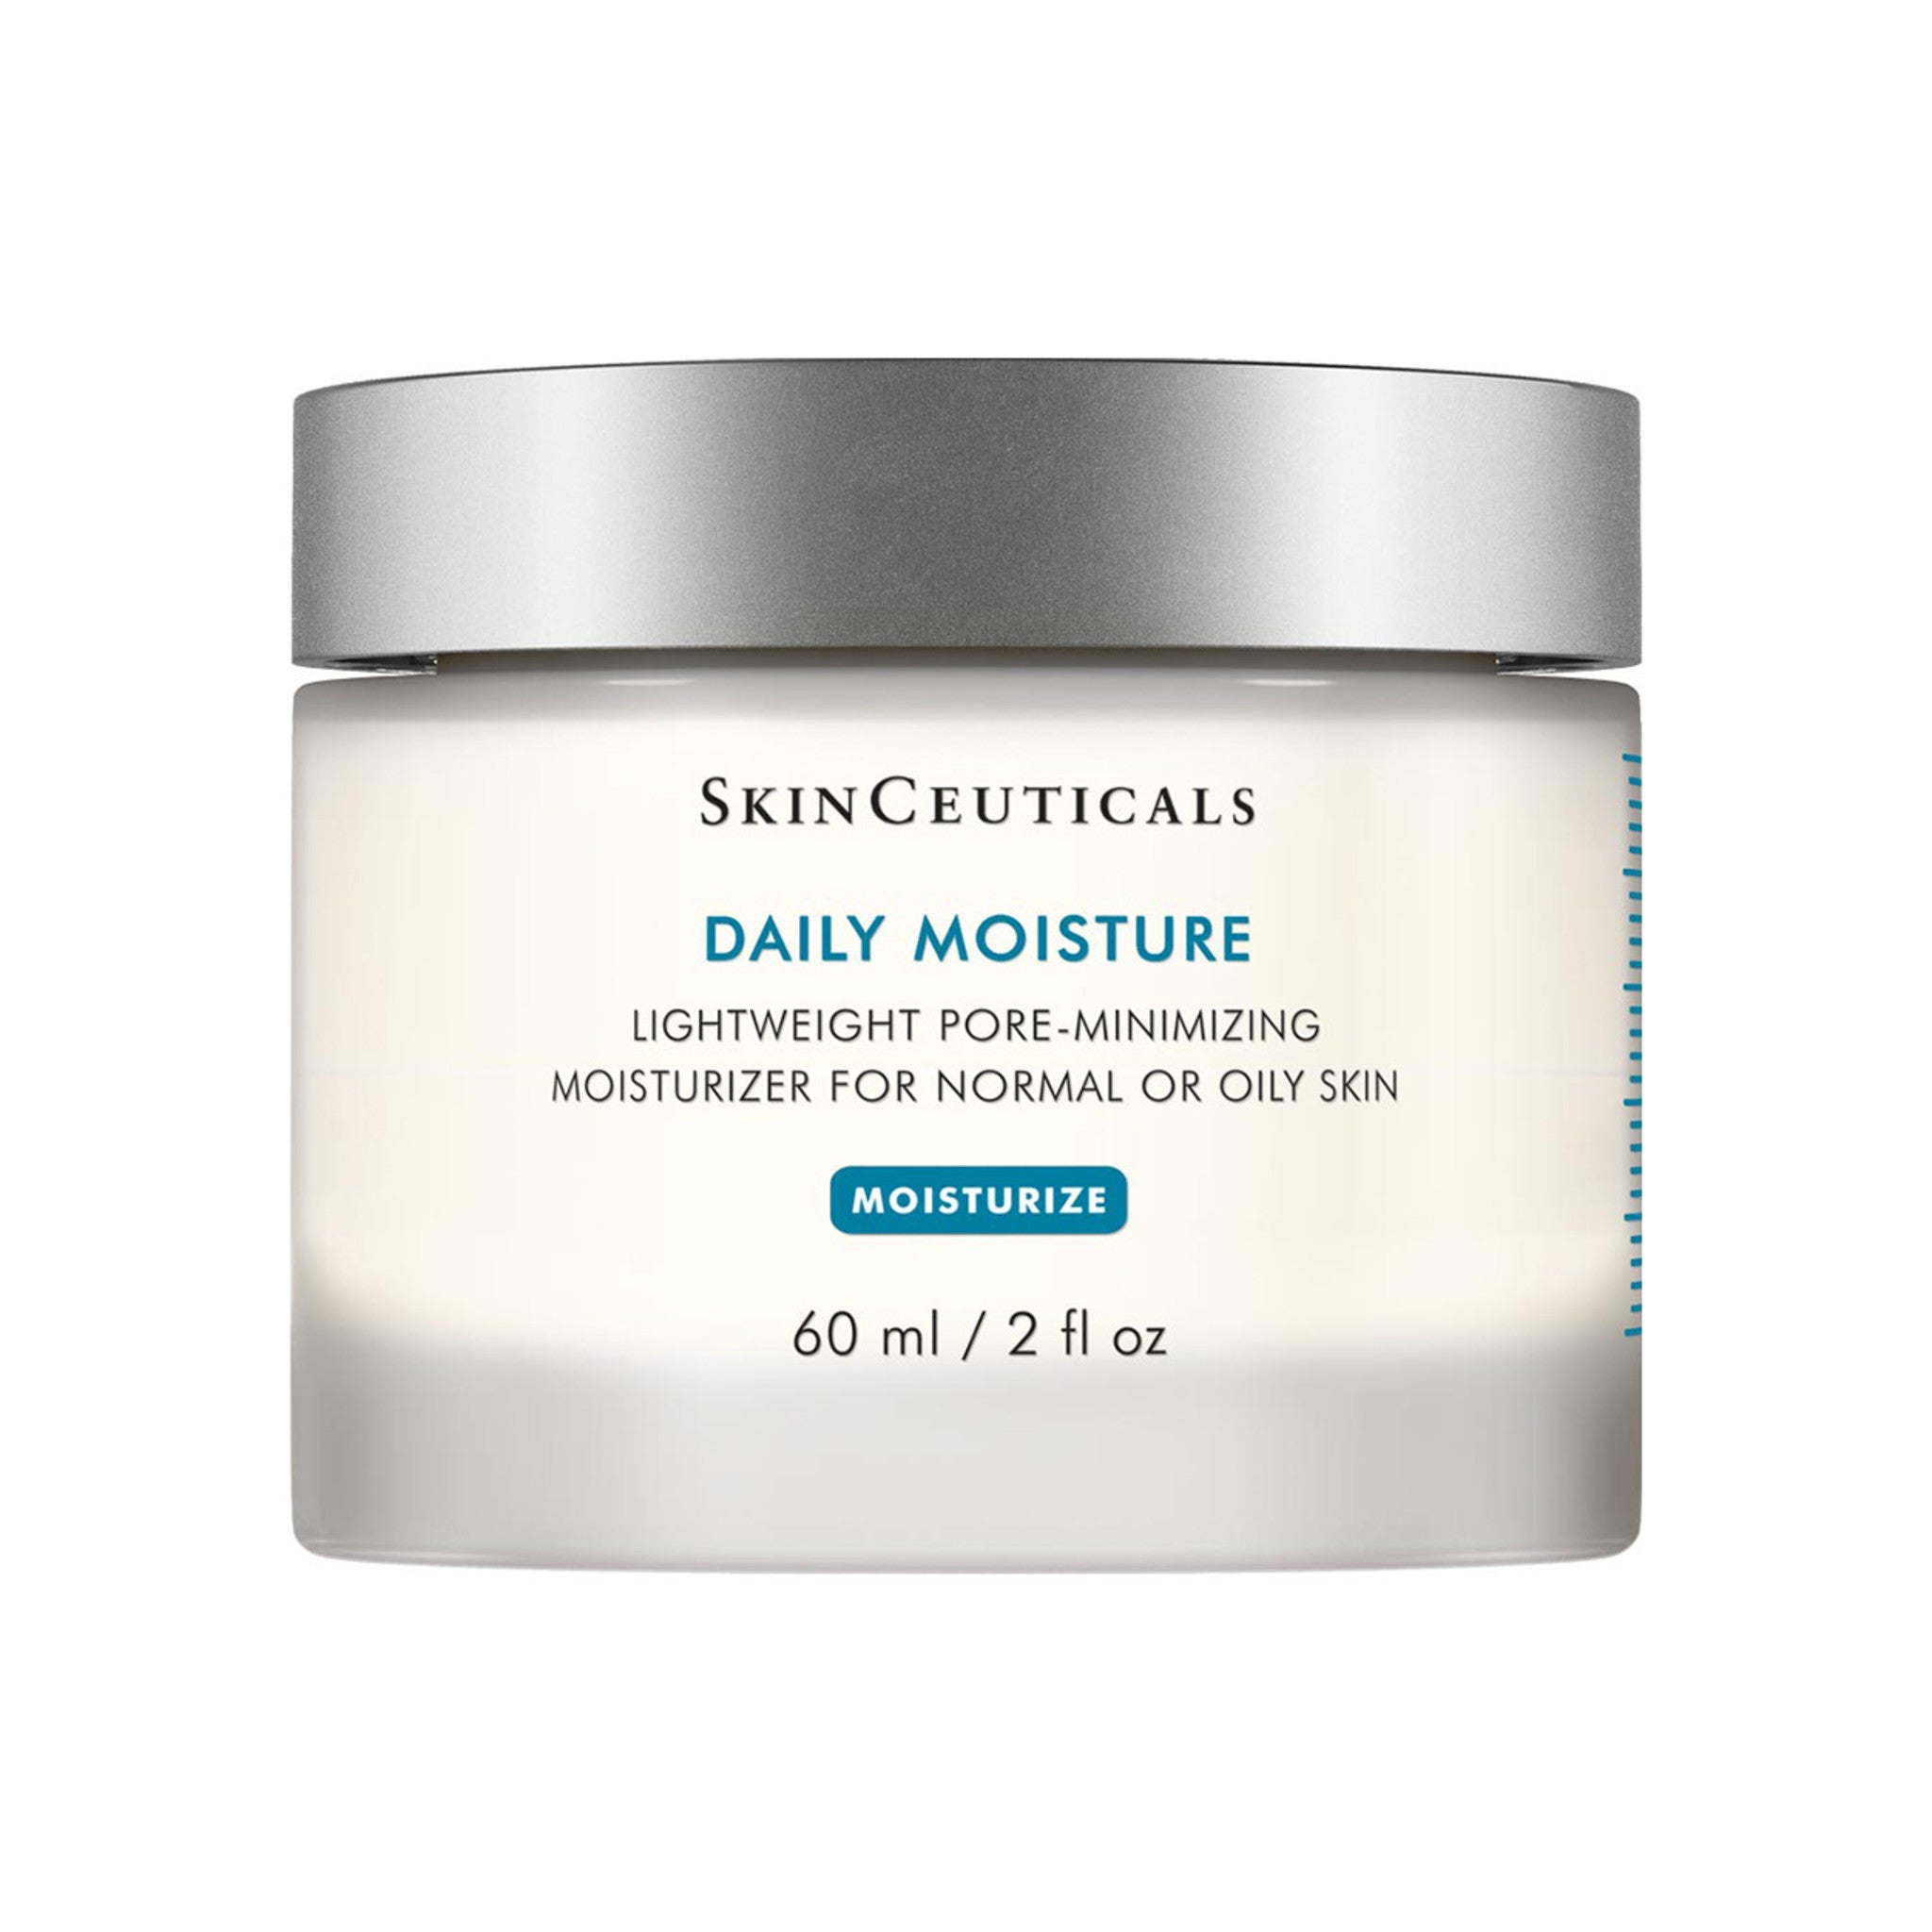 SkinCeuticals Daily Moisture main image.